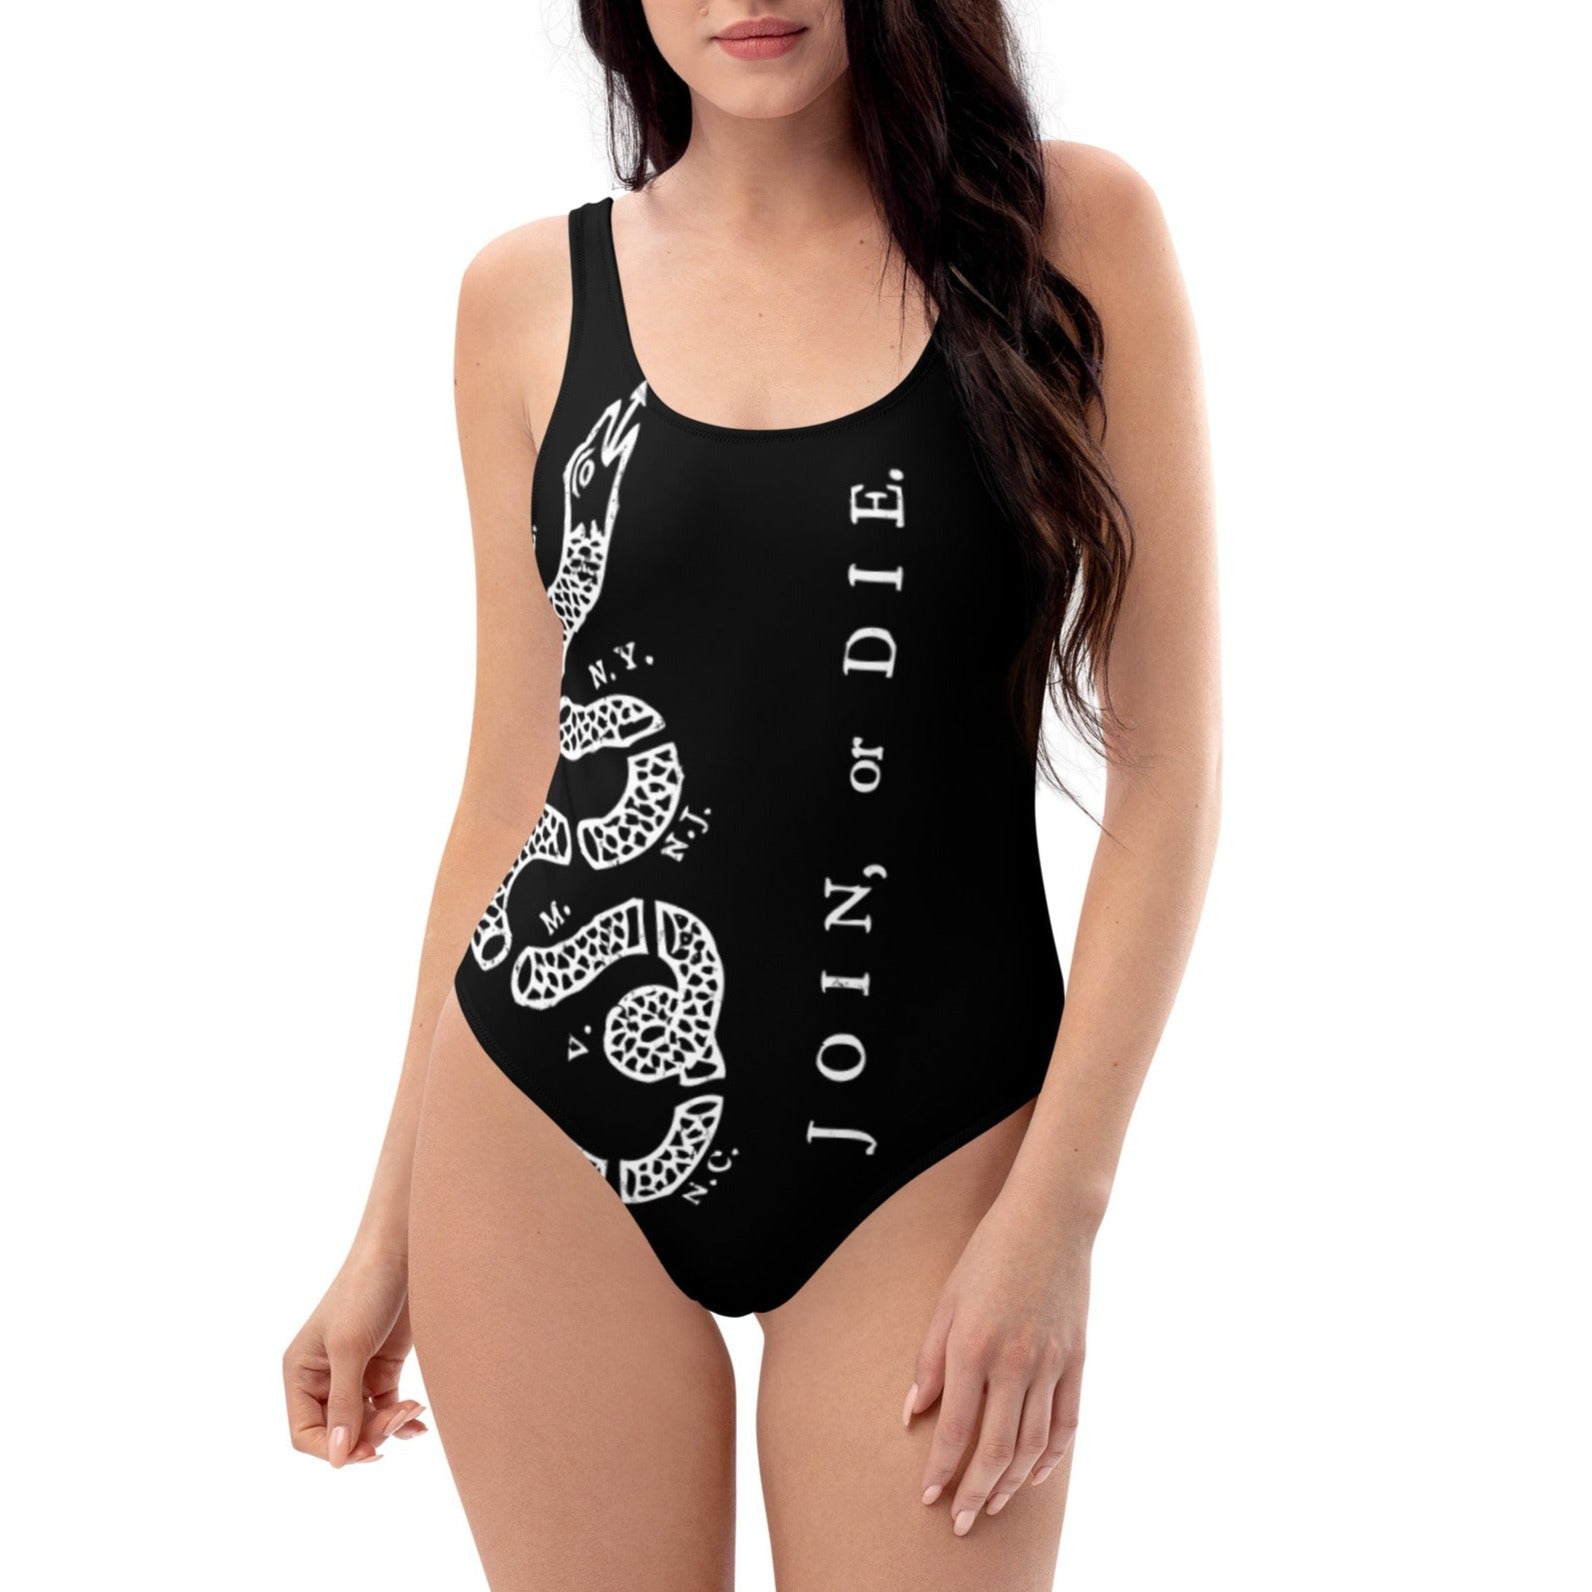 Join or Die One-Piece Swimsuit